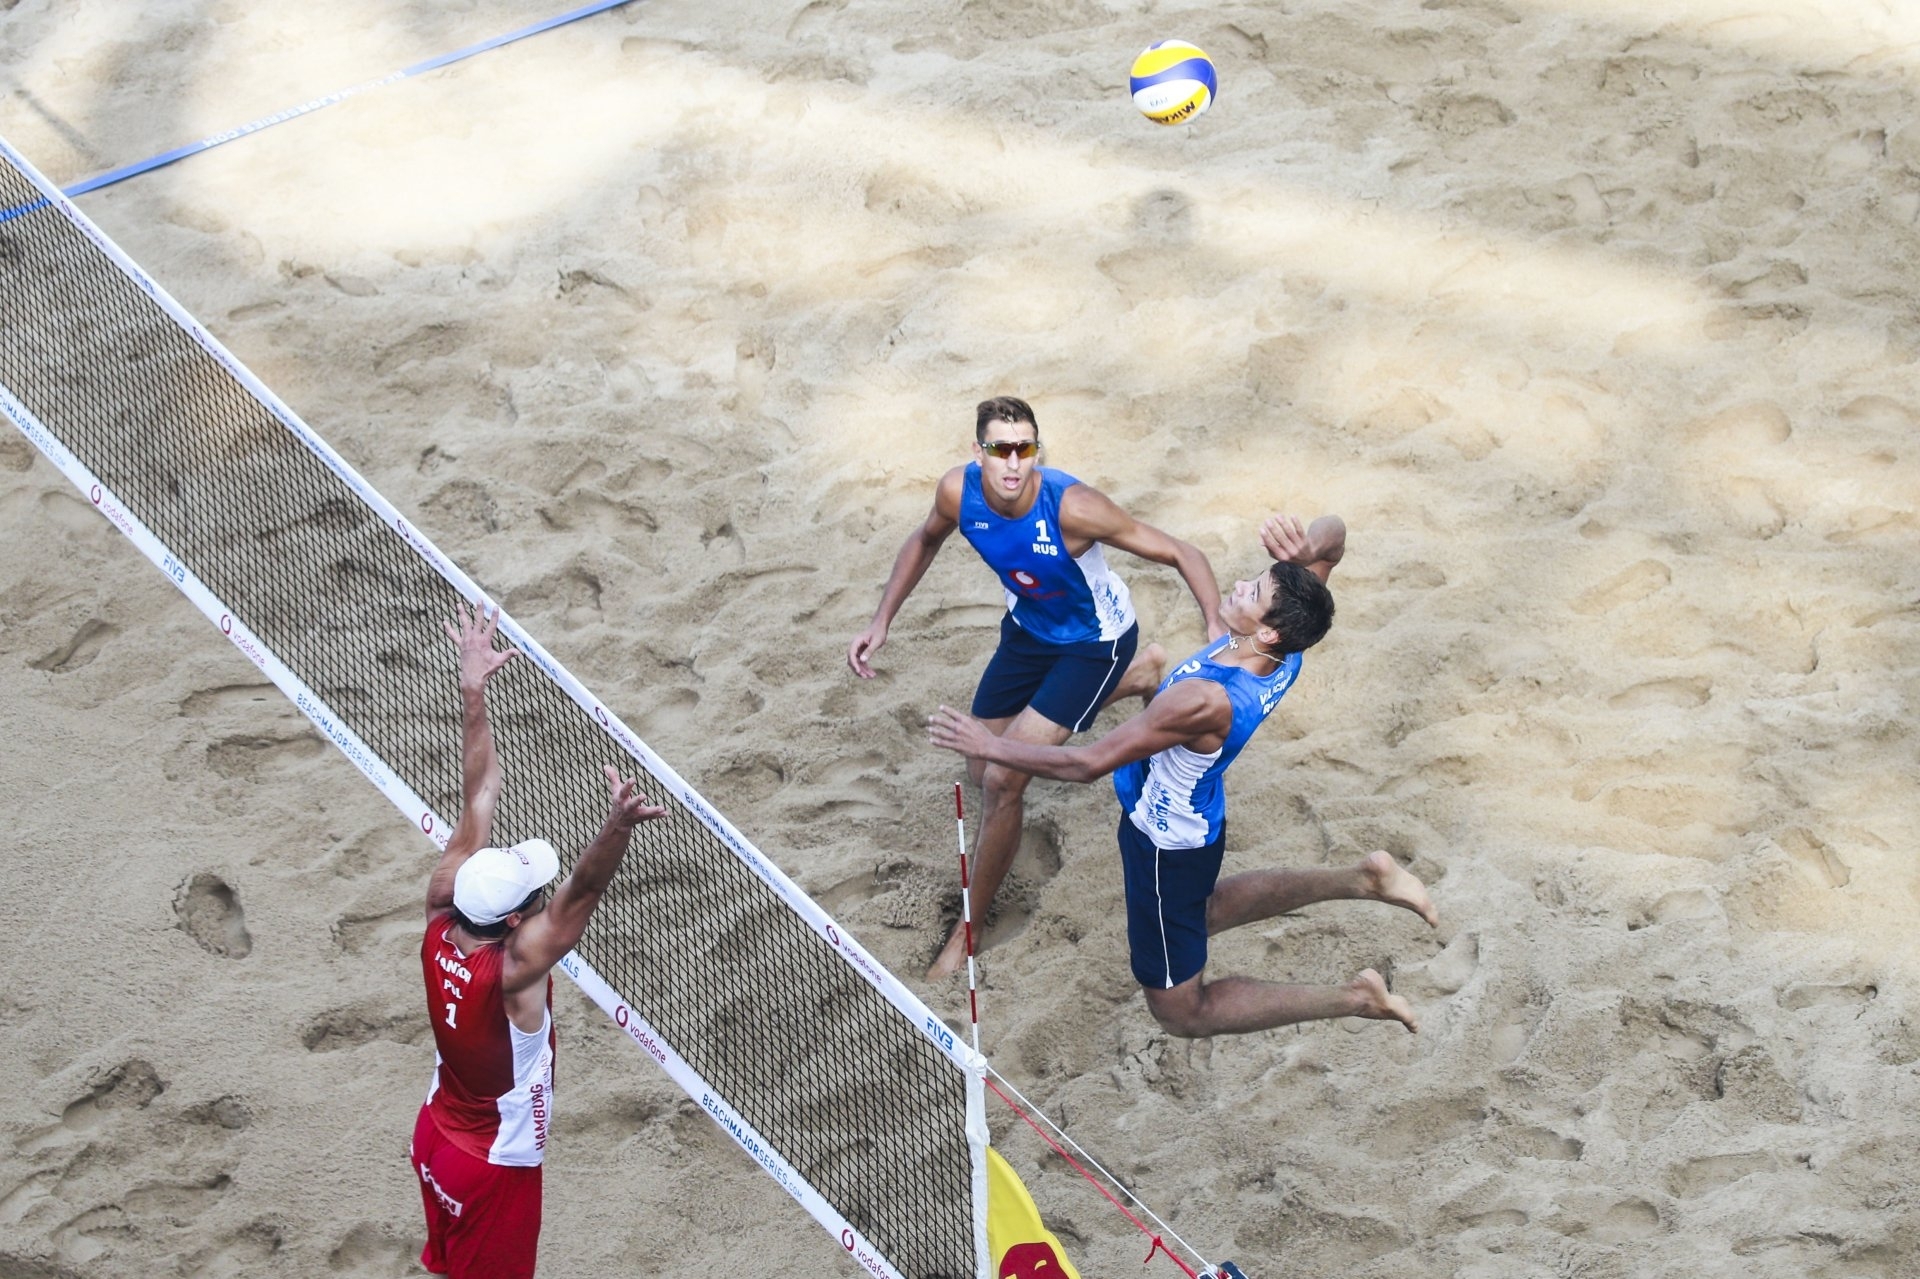 Oleg (left) and Igor (spiking) in action on their World Tour Finals debut